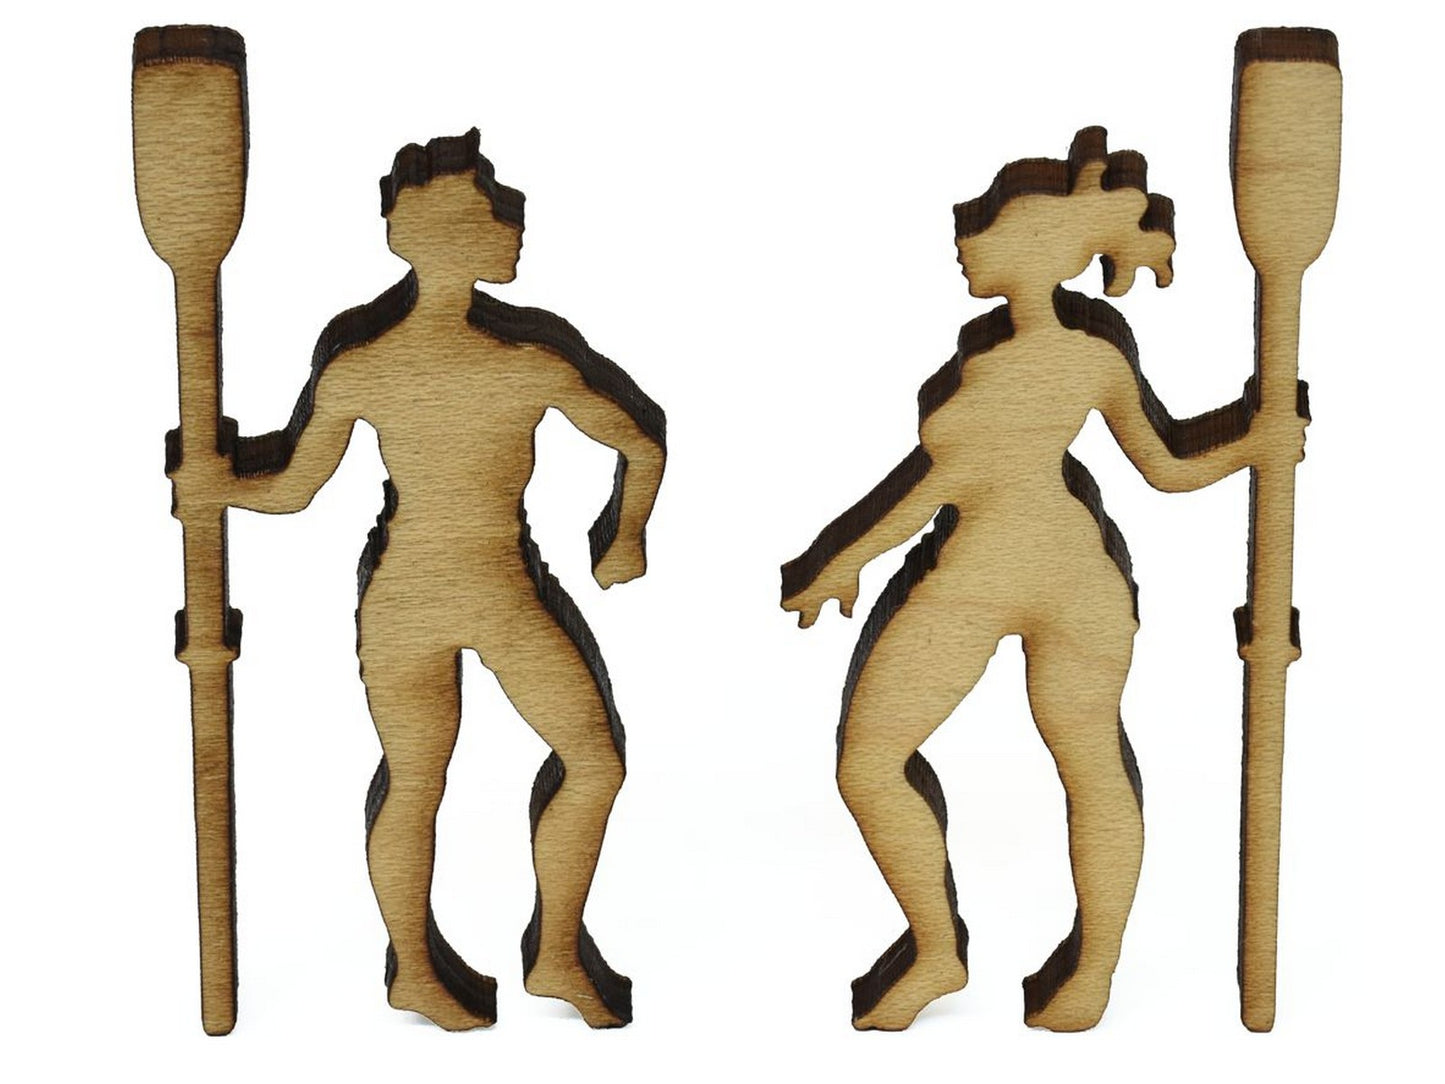 A closeup of pieces showing two people holding their oars.